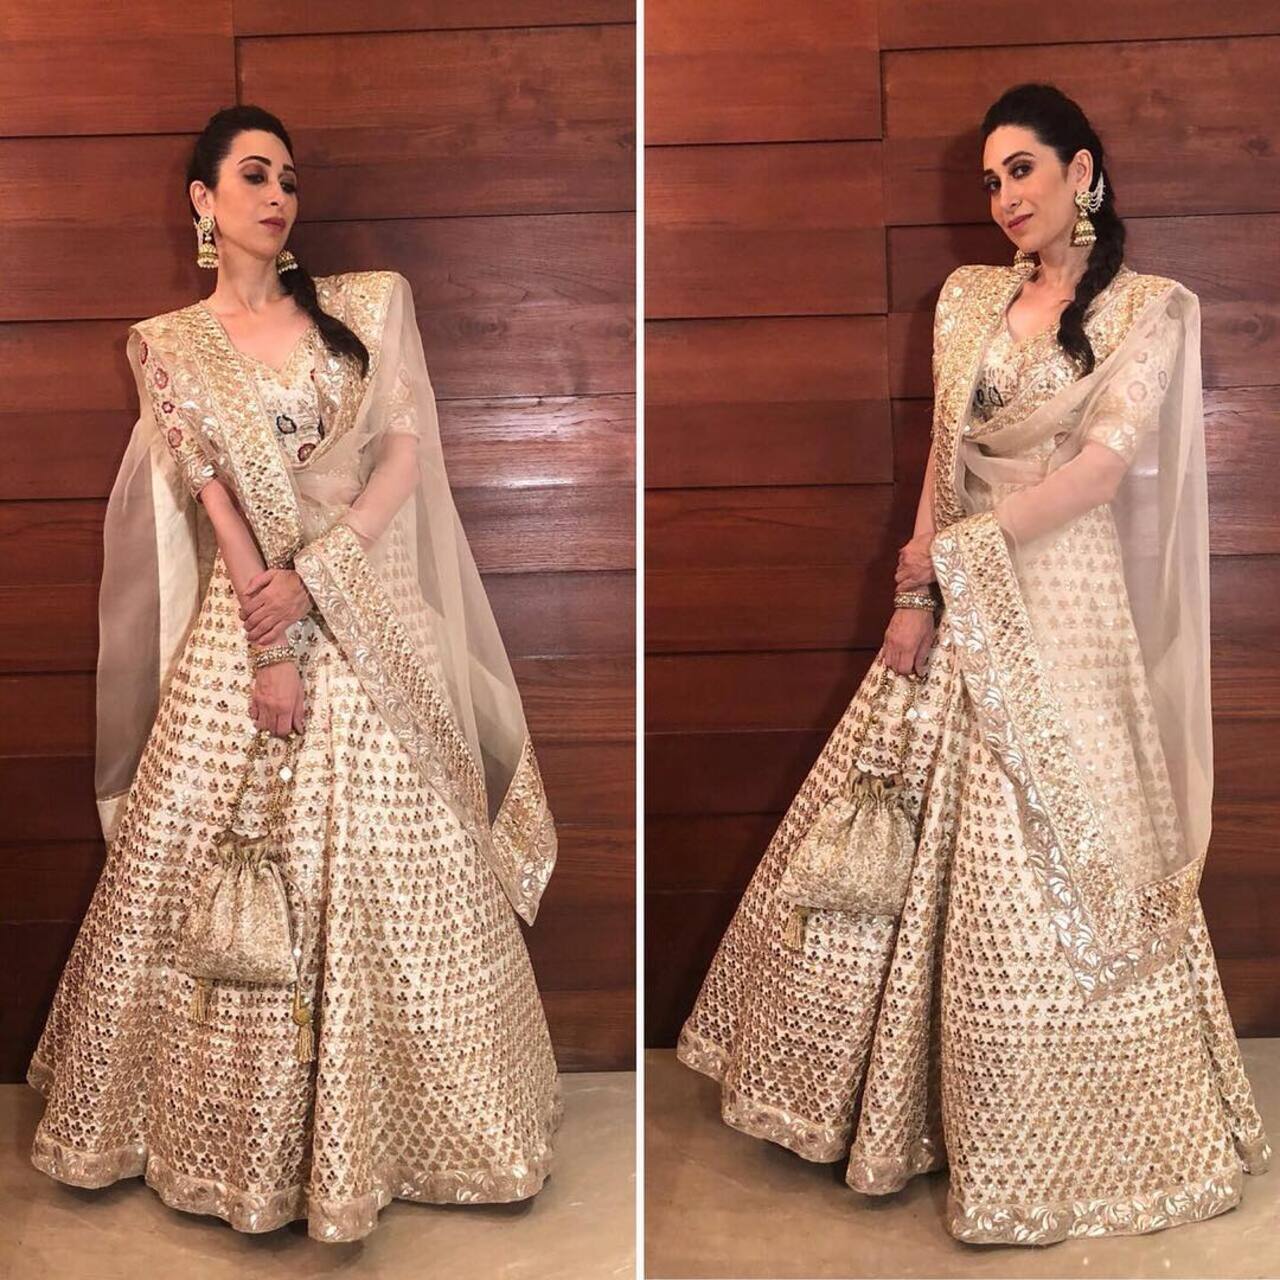 Karisma Kapoor
Karisma Kapoor has aged like fine wine, and is a fashion icon in her own right! She exuded some truly divine goddess energy in this heavily embellish Manish Malhotra golden lehenga with a stylish fishtail braid and potli-style bag